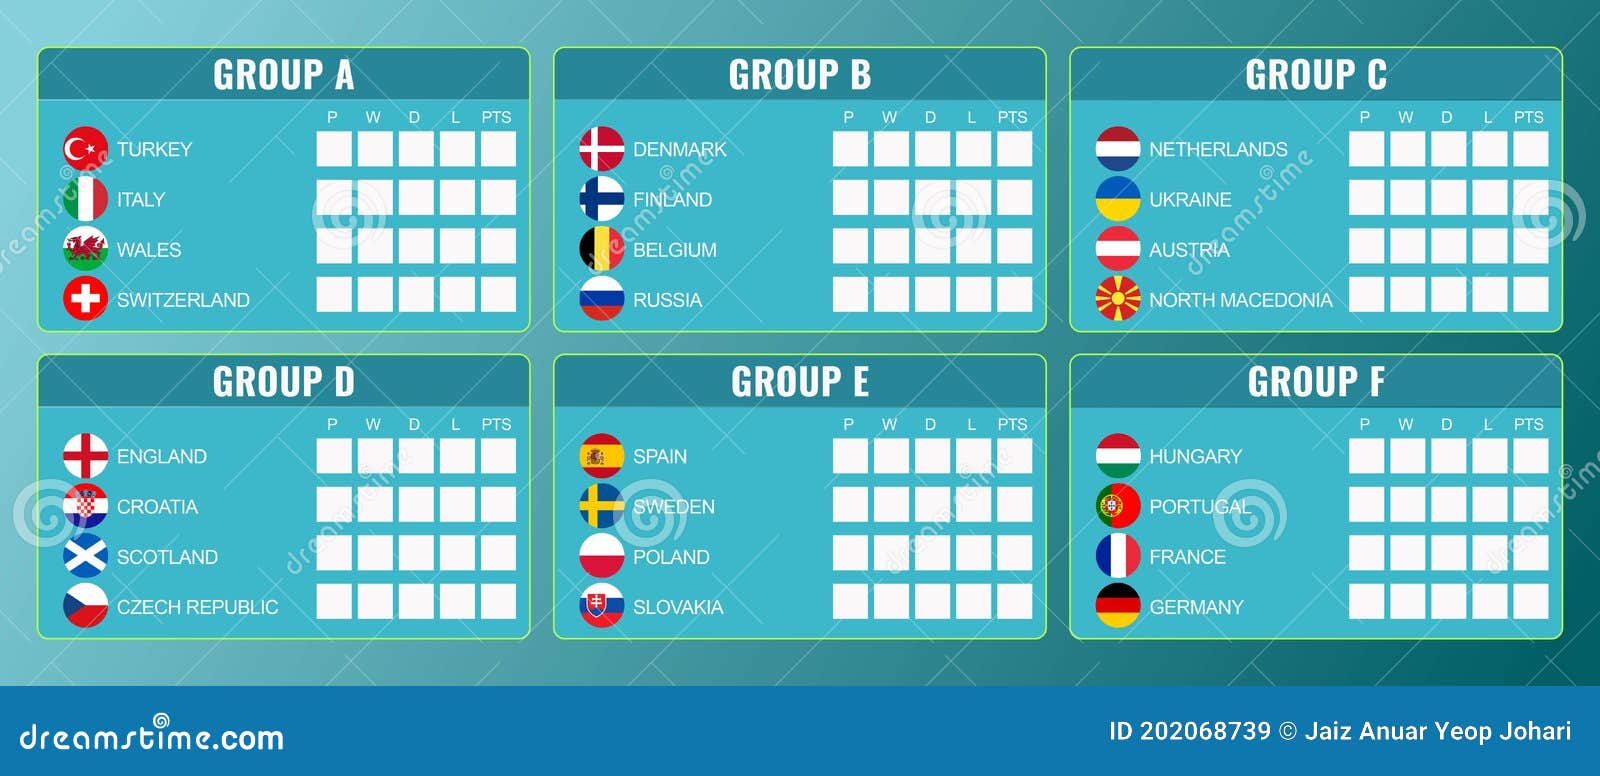 Euro 2020 Groups Table : Euro 2020: Germany and Netherlands set to clash in ... : Here are the latest euro 2020 tables in full, with the group stage standings updated throughout the tournament this summer.